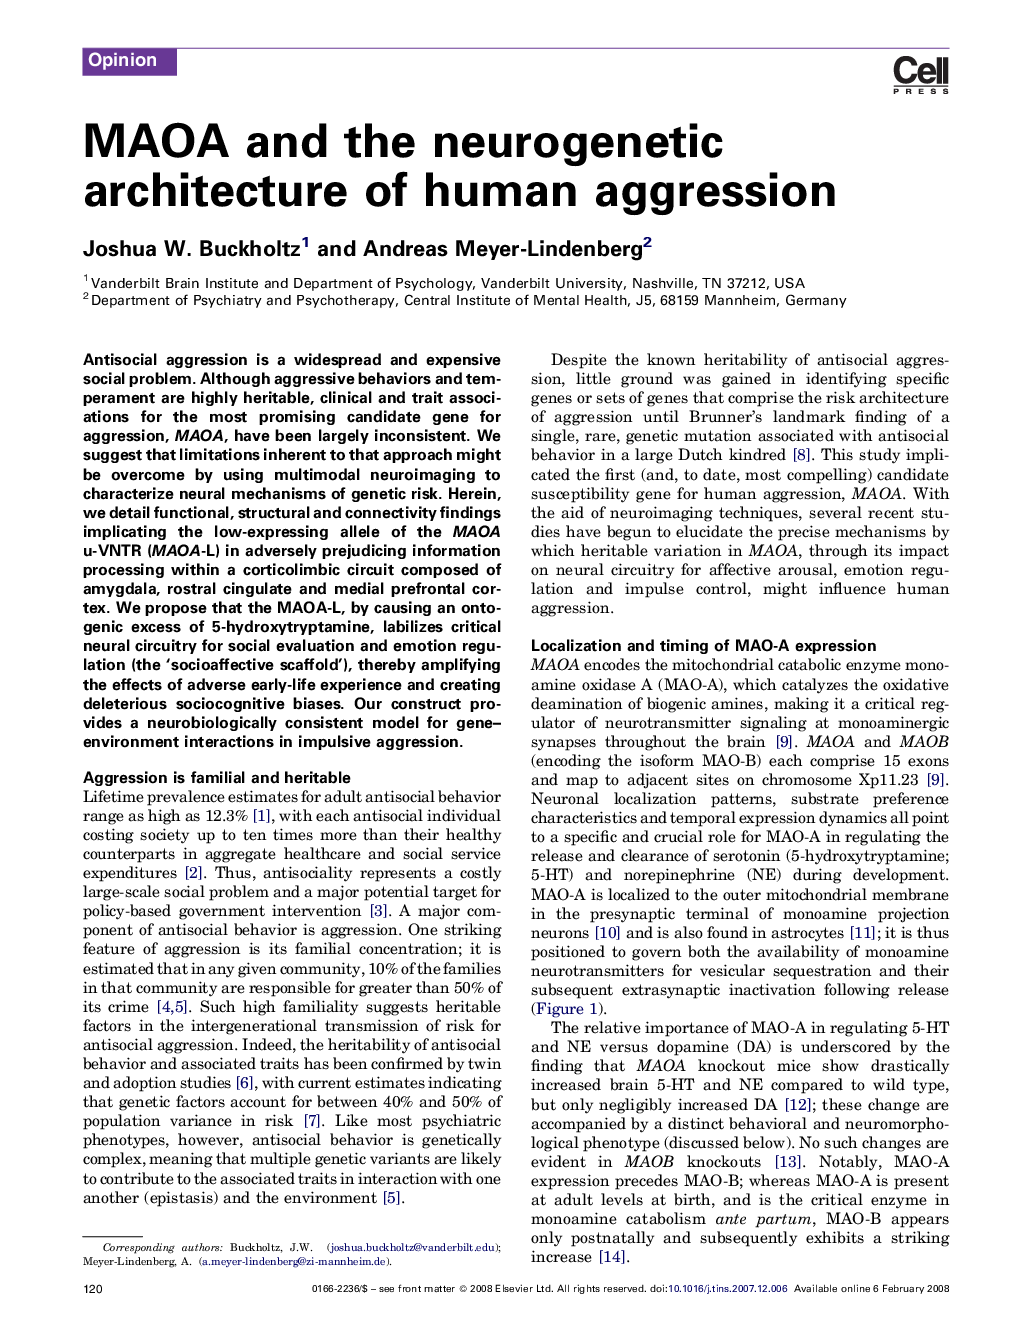 MAOA and the neurogenetic architecture of human aggression